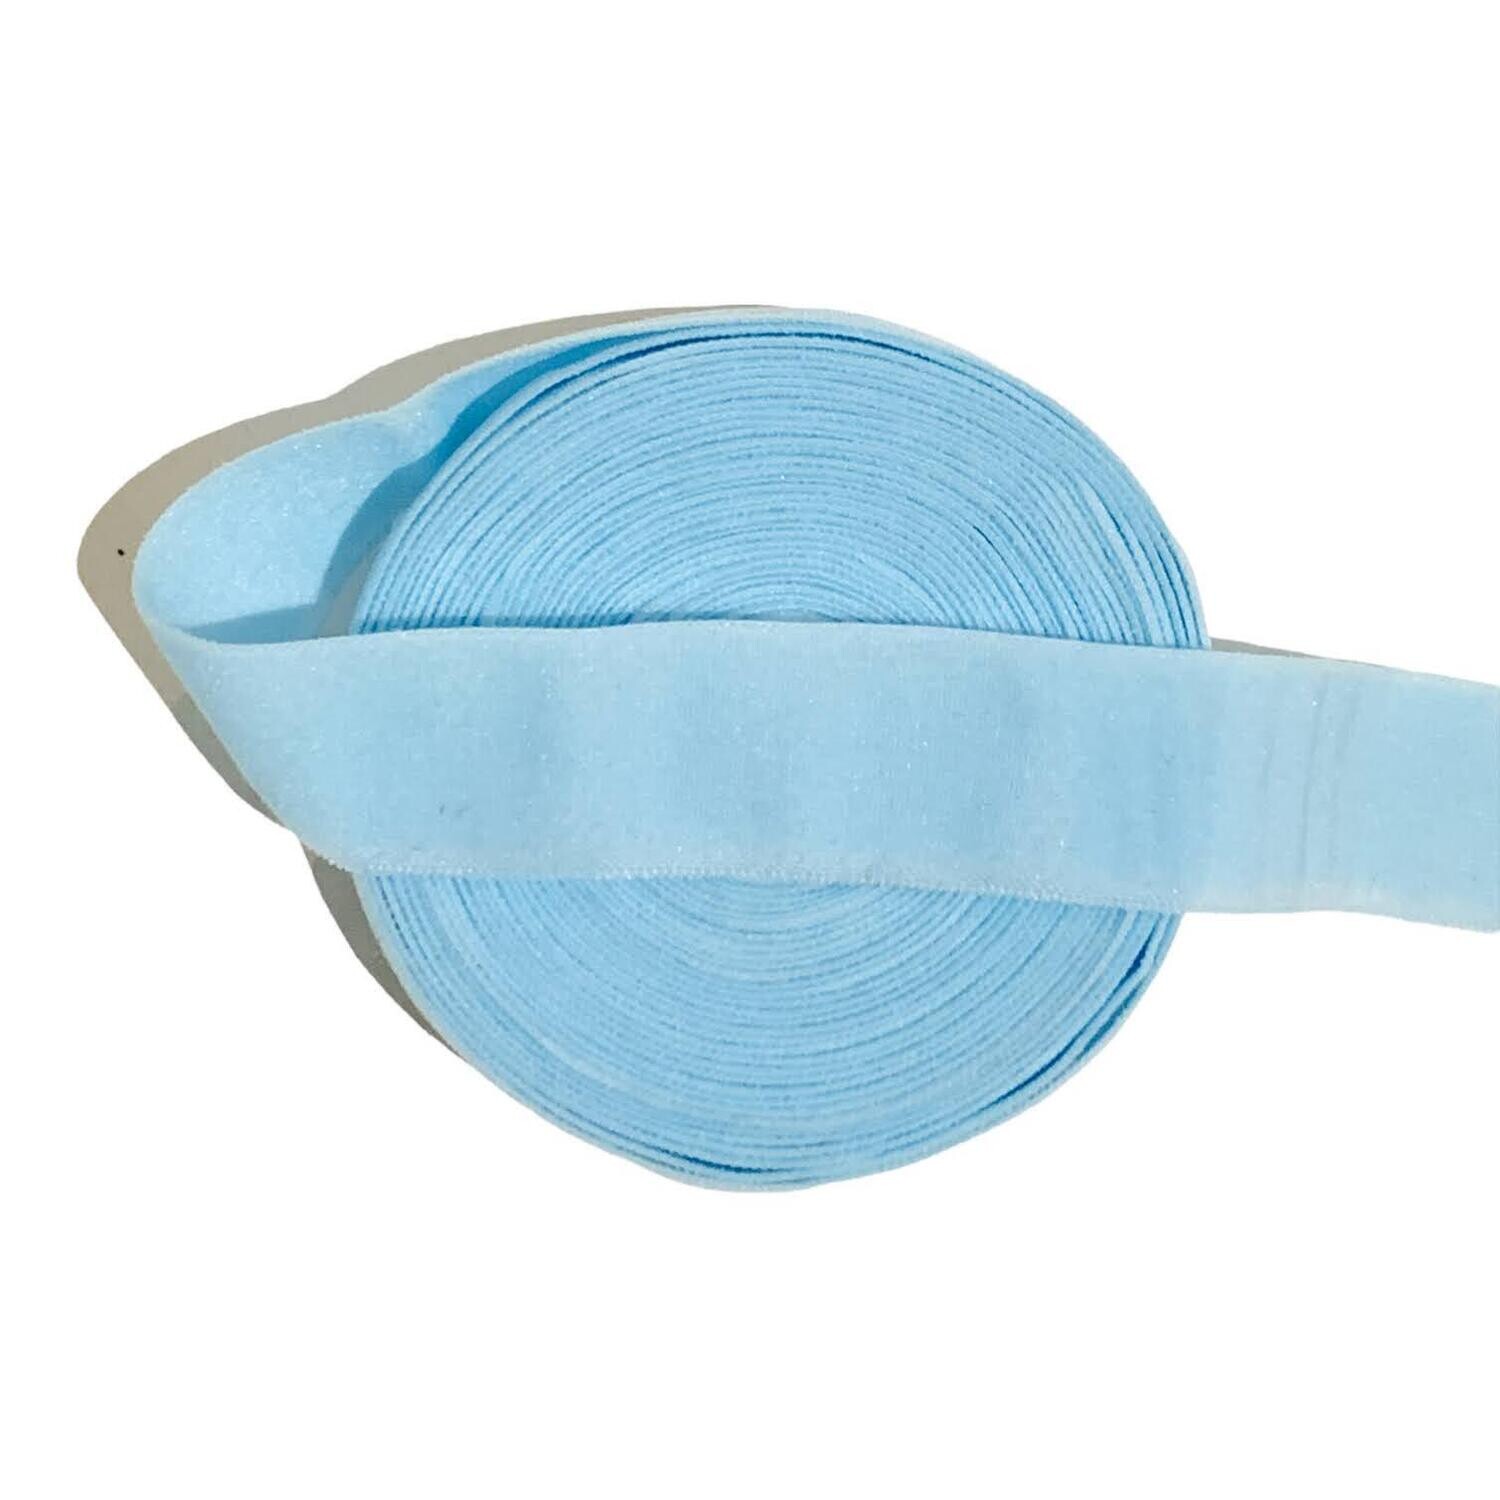 Baby Blue | Soft Waistband Elastic | 20mm Wide - 5 meters